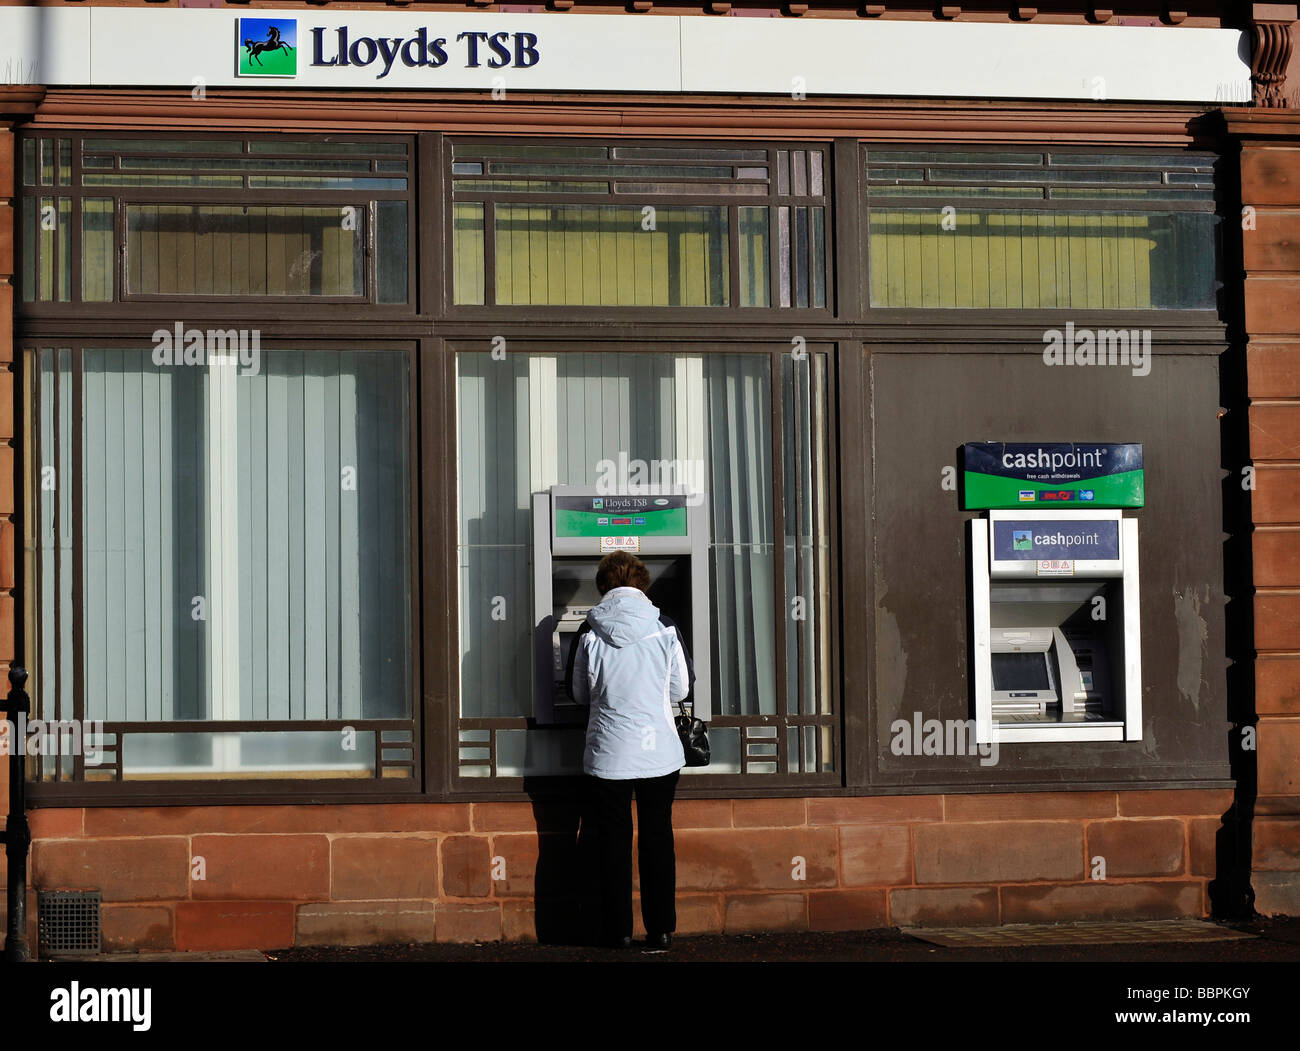 A women uses an ATM cashpoint at Lloyds TSB bank Stock Photo